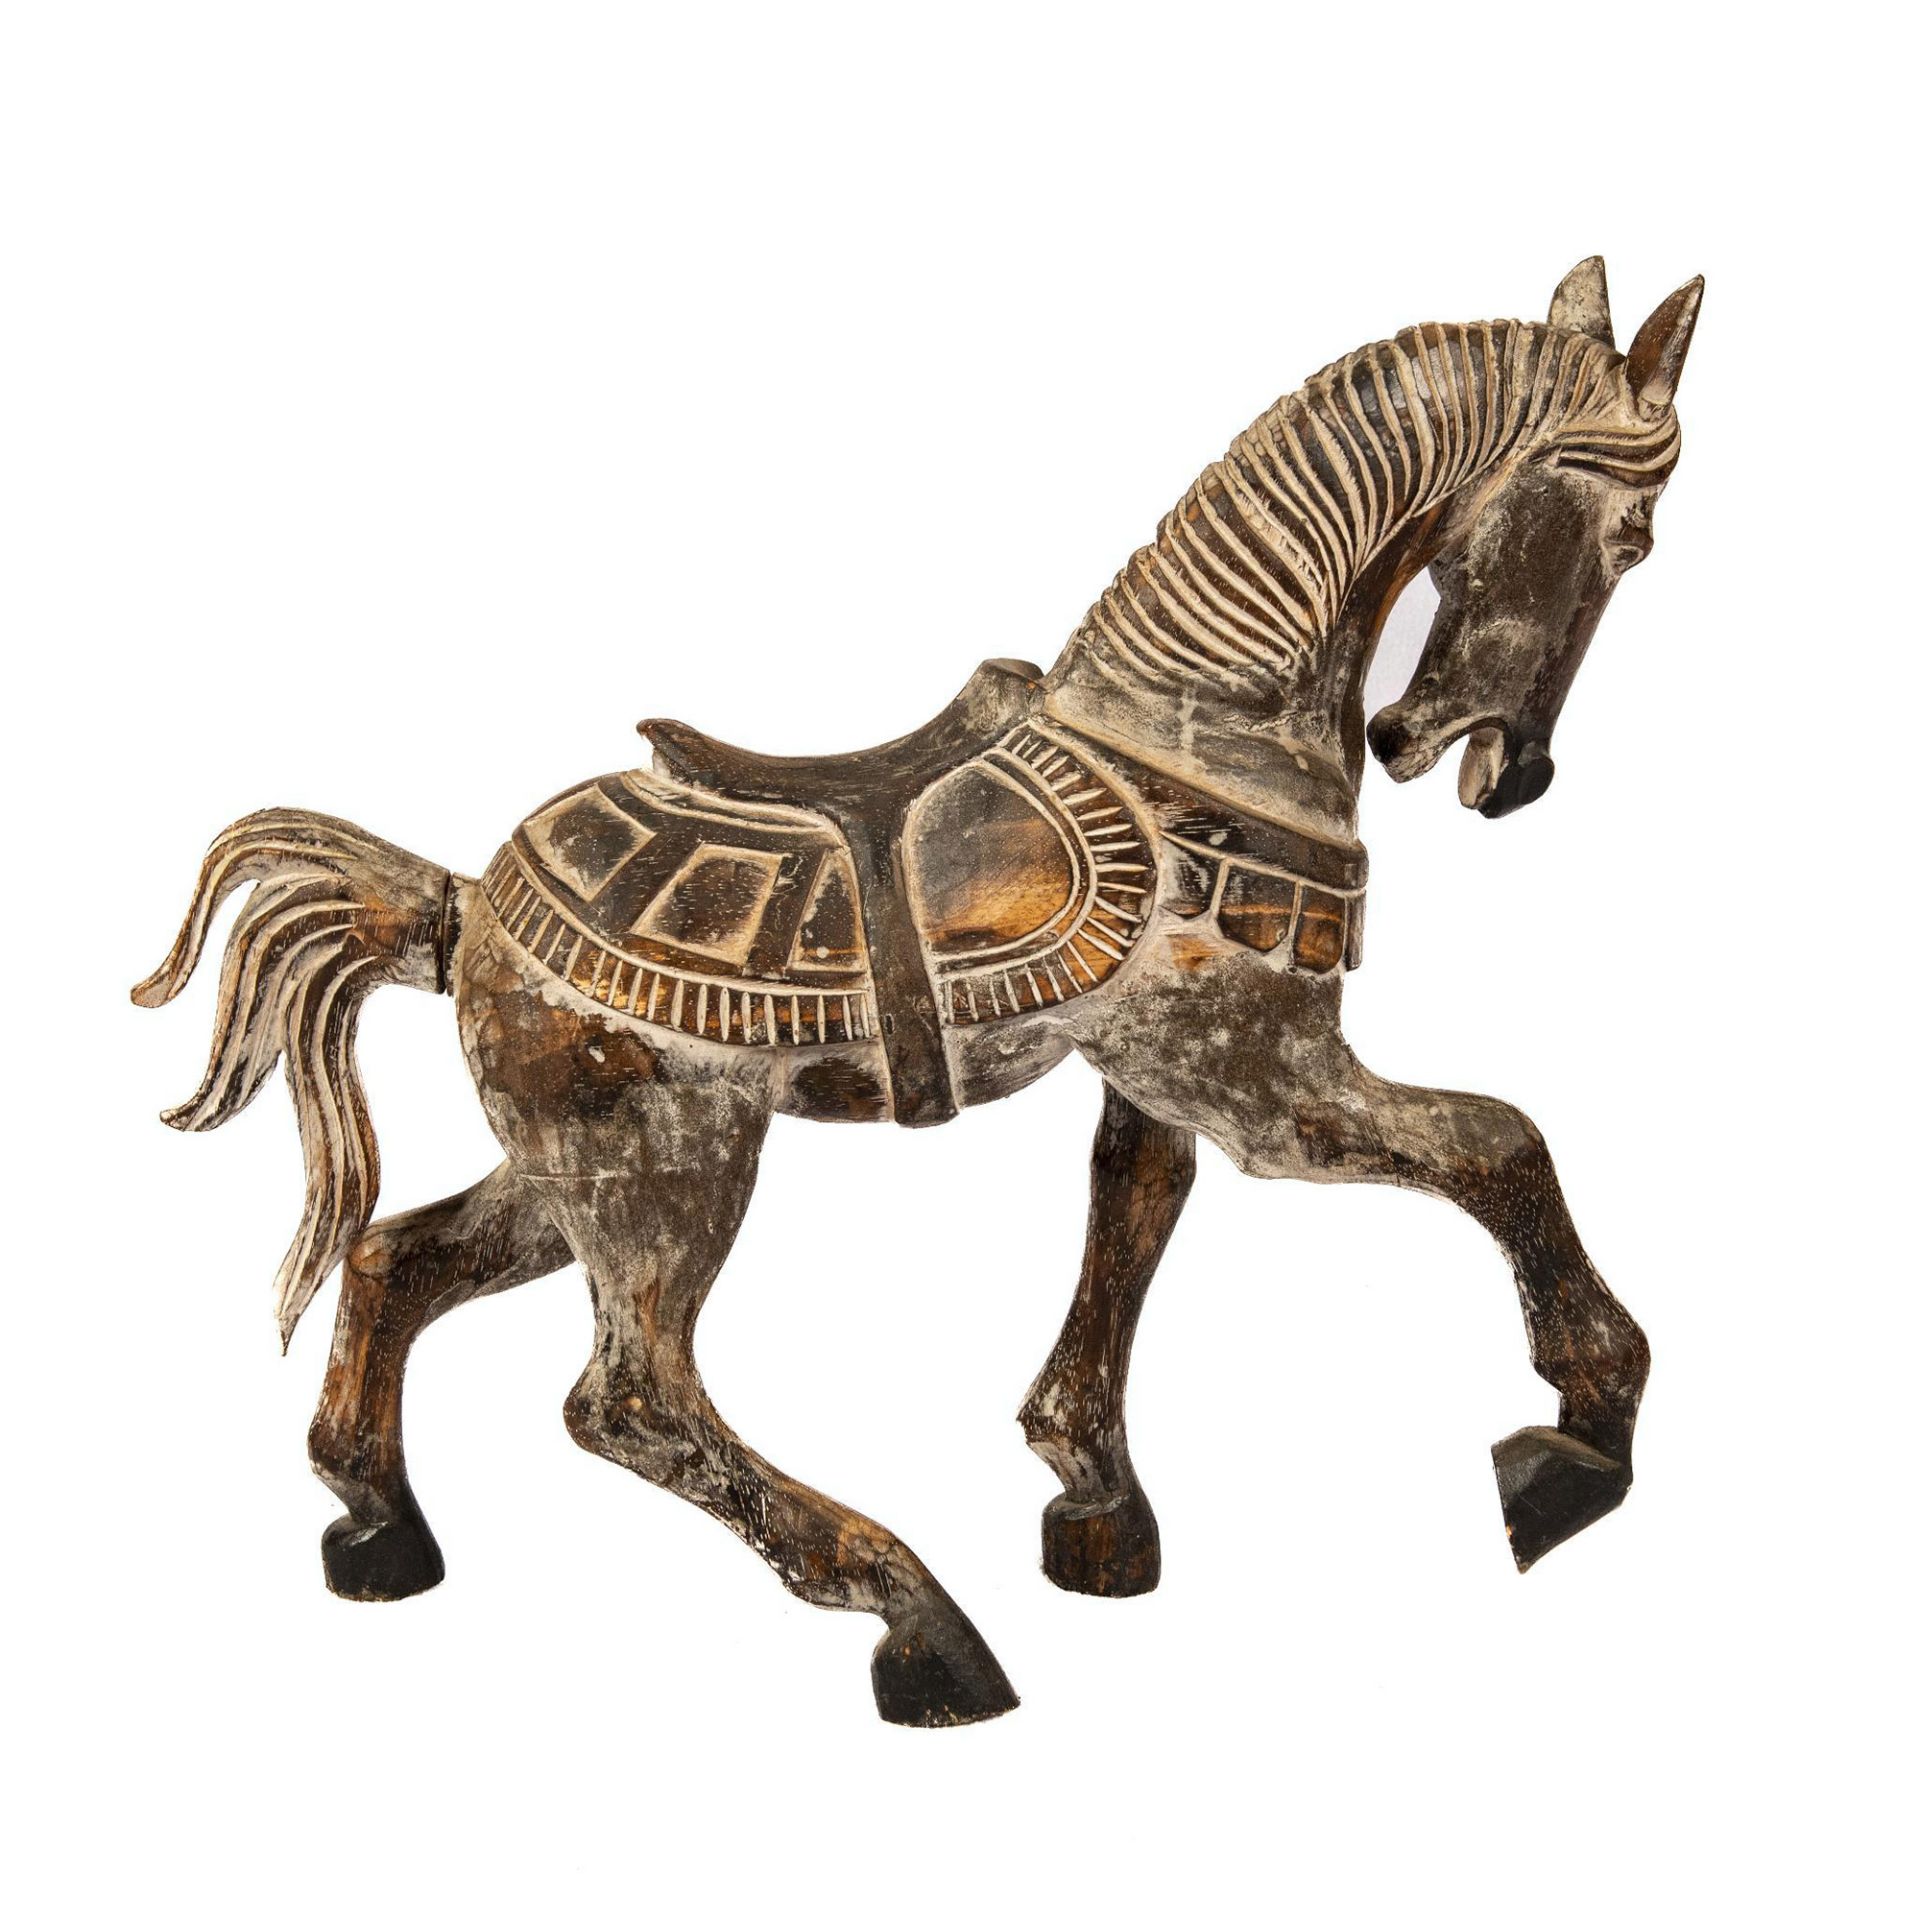 Vintage Hand Carved Wood Carousel Style Horse Monochromatic - Image 3 of 4